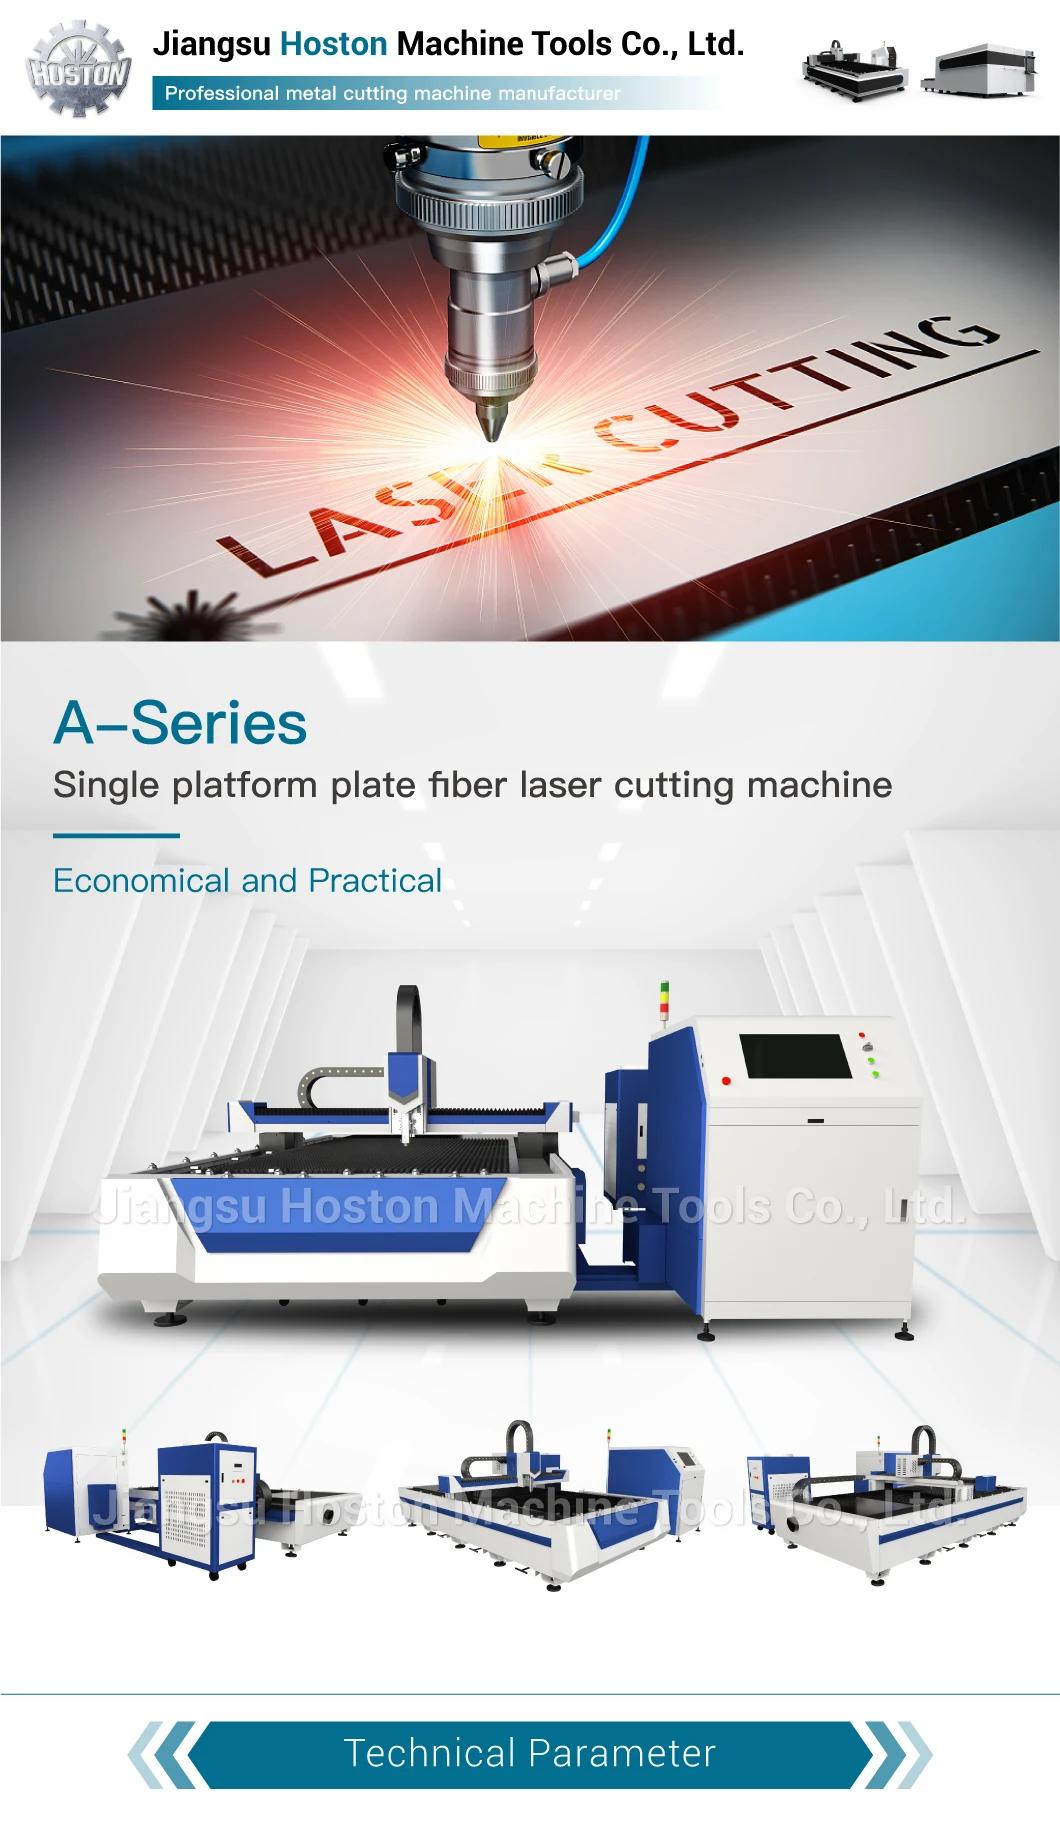 Raycus Ipg Nlight Max Optic Deep Cutting Fiber Laser Cutting Machine with Rotery Axis